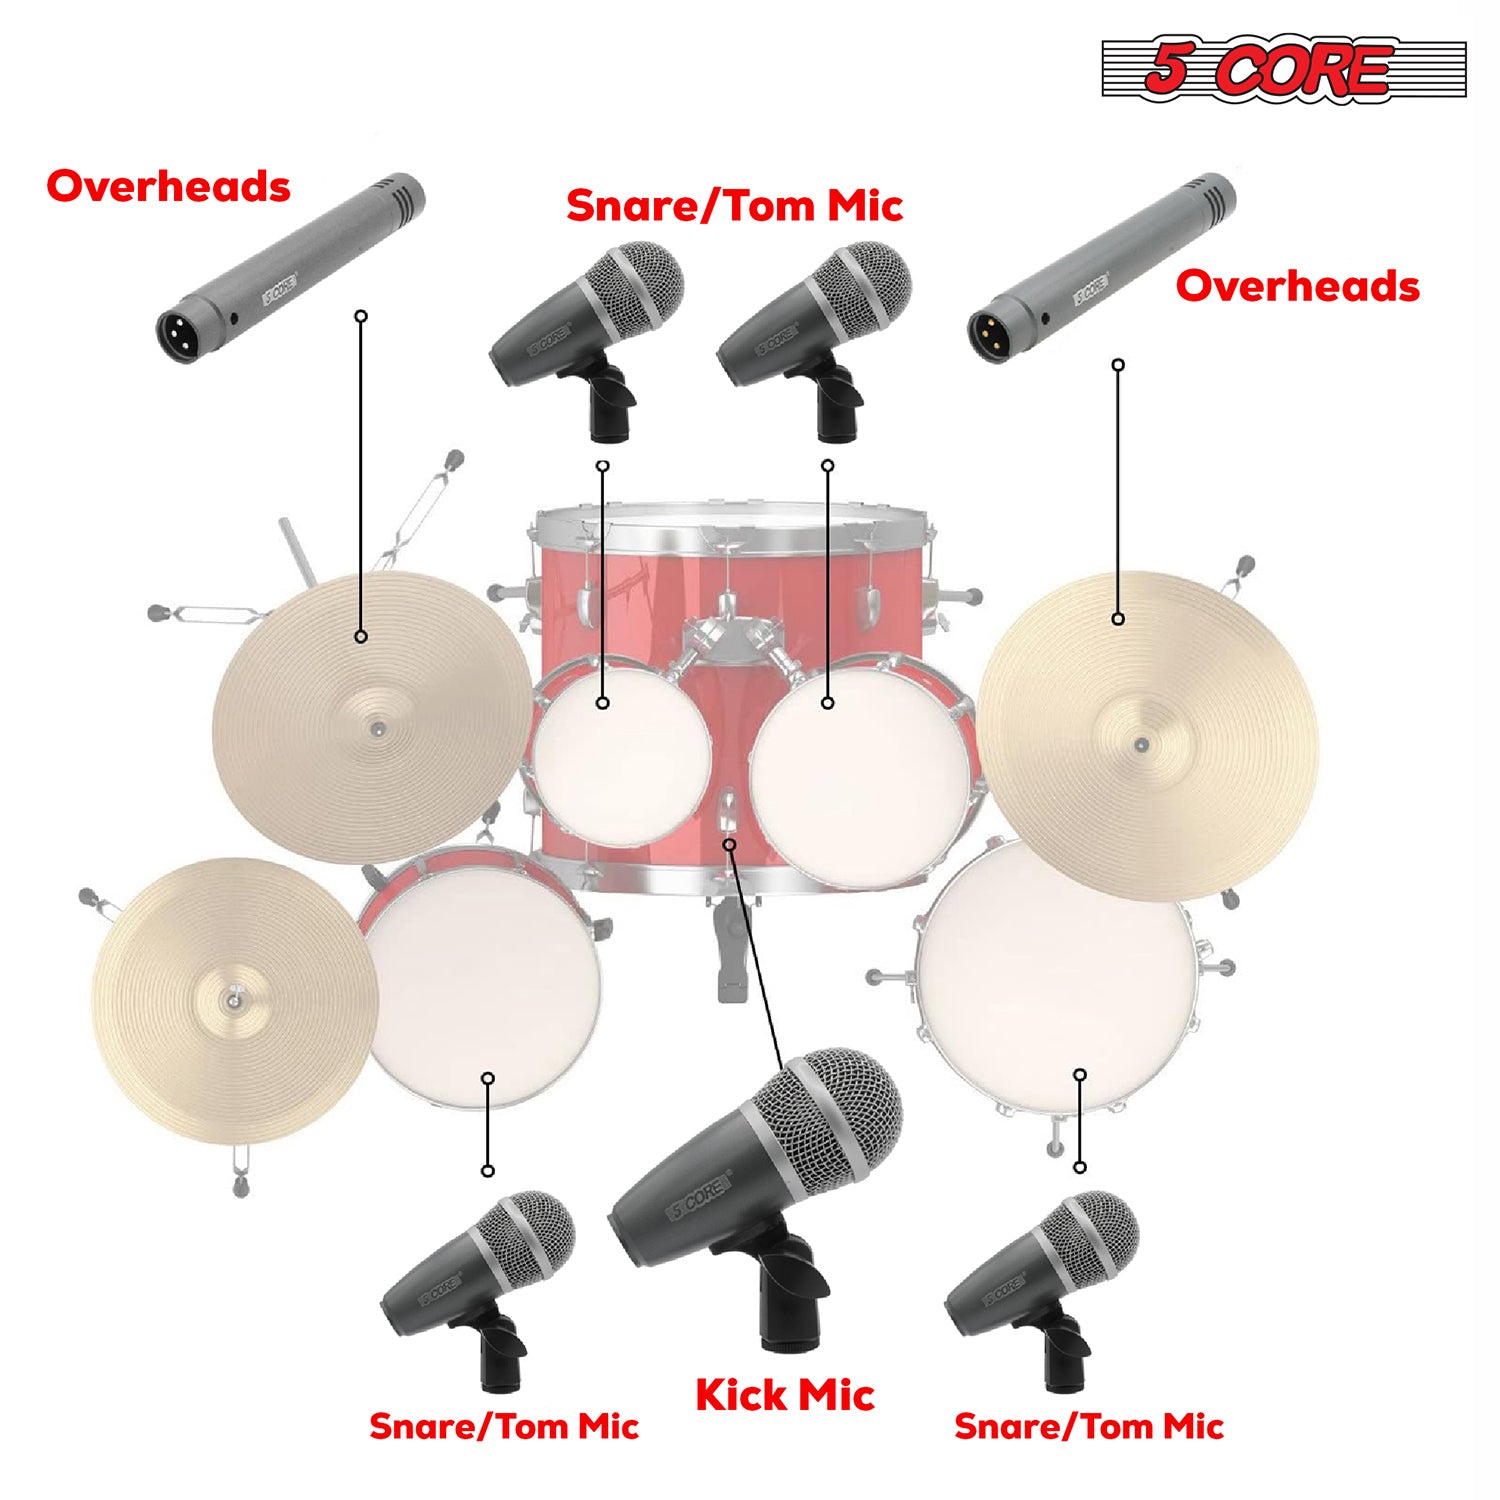 Complete 9-piece drum microphone kit for kick bass, tom/snare, and cymbals